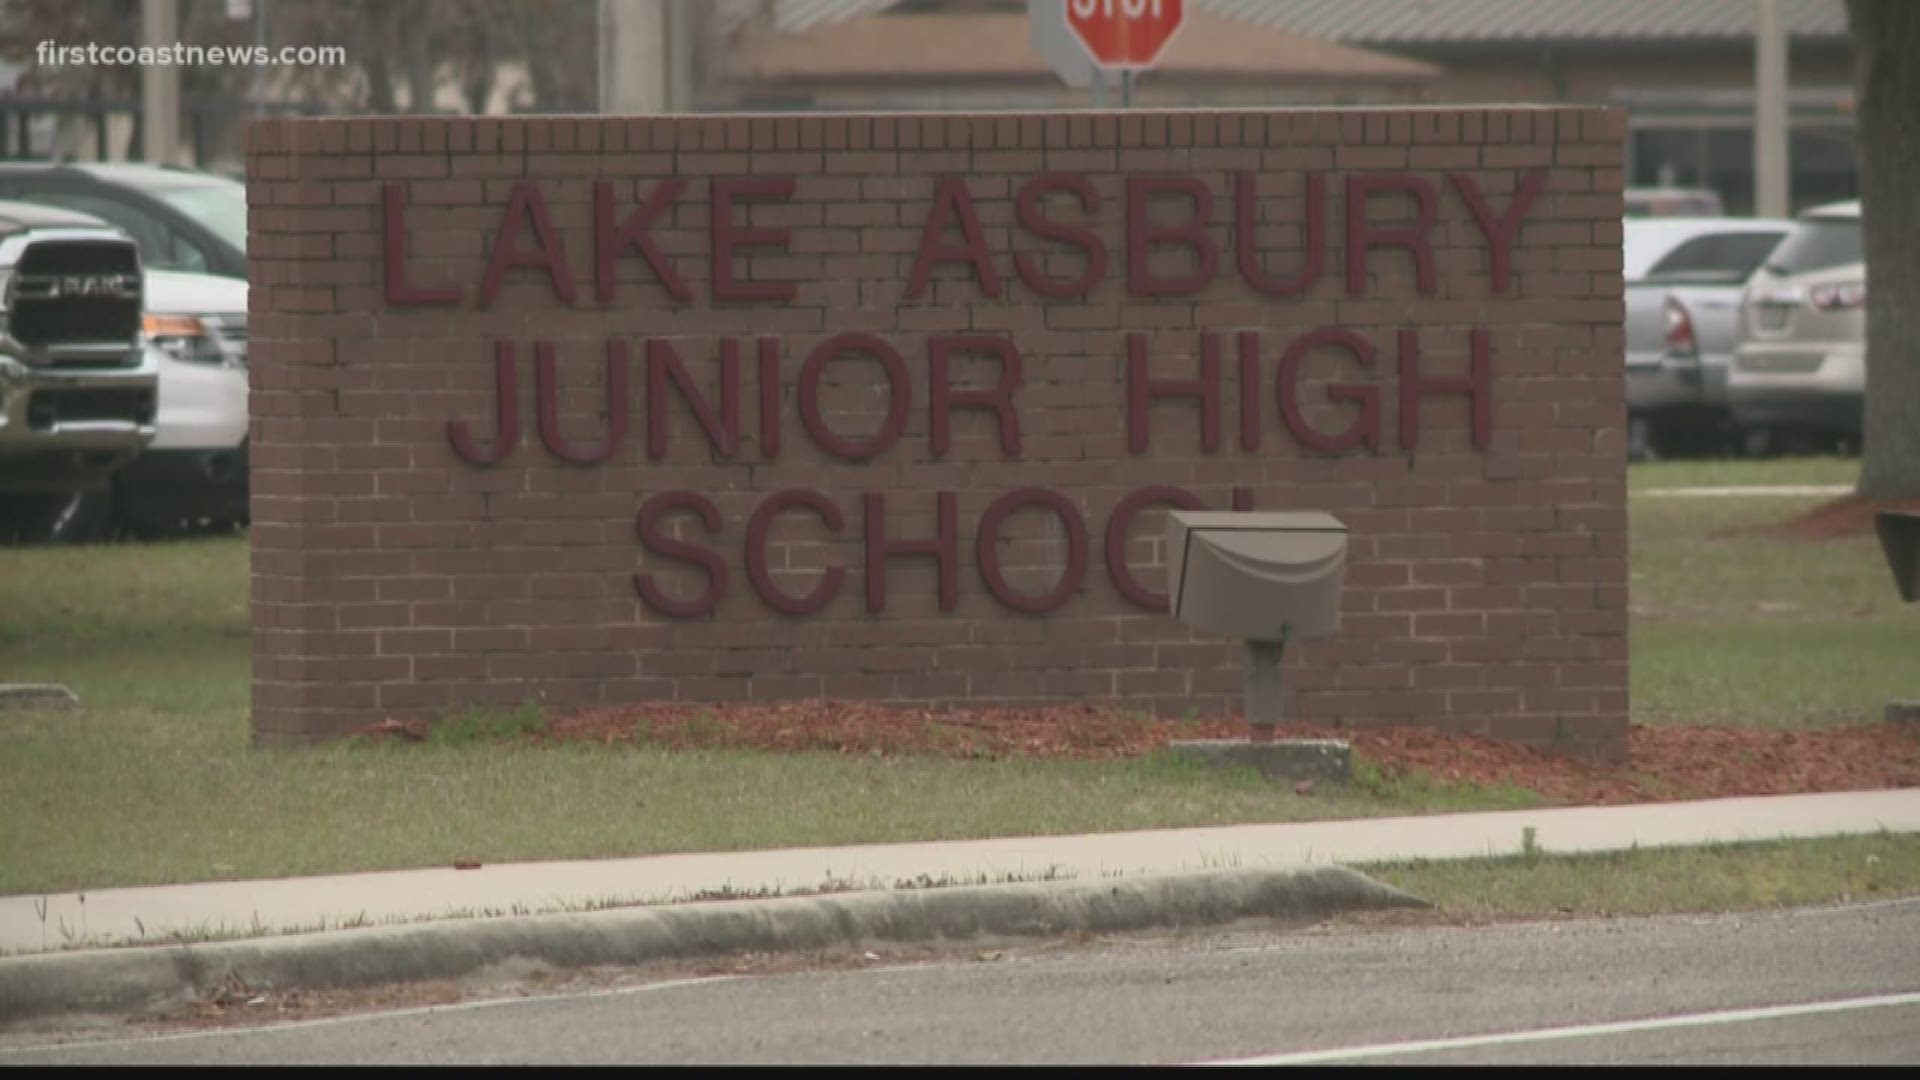 Sabrina Rock says several pages called "Lake Asbury Junior High Confessions" have led to bullying in the classroom.